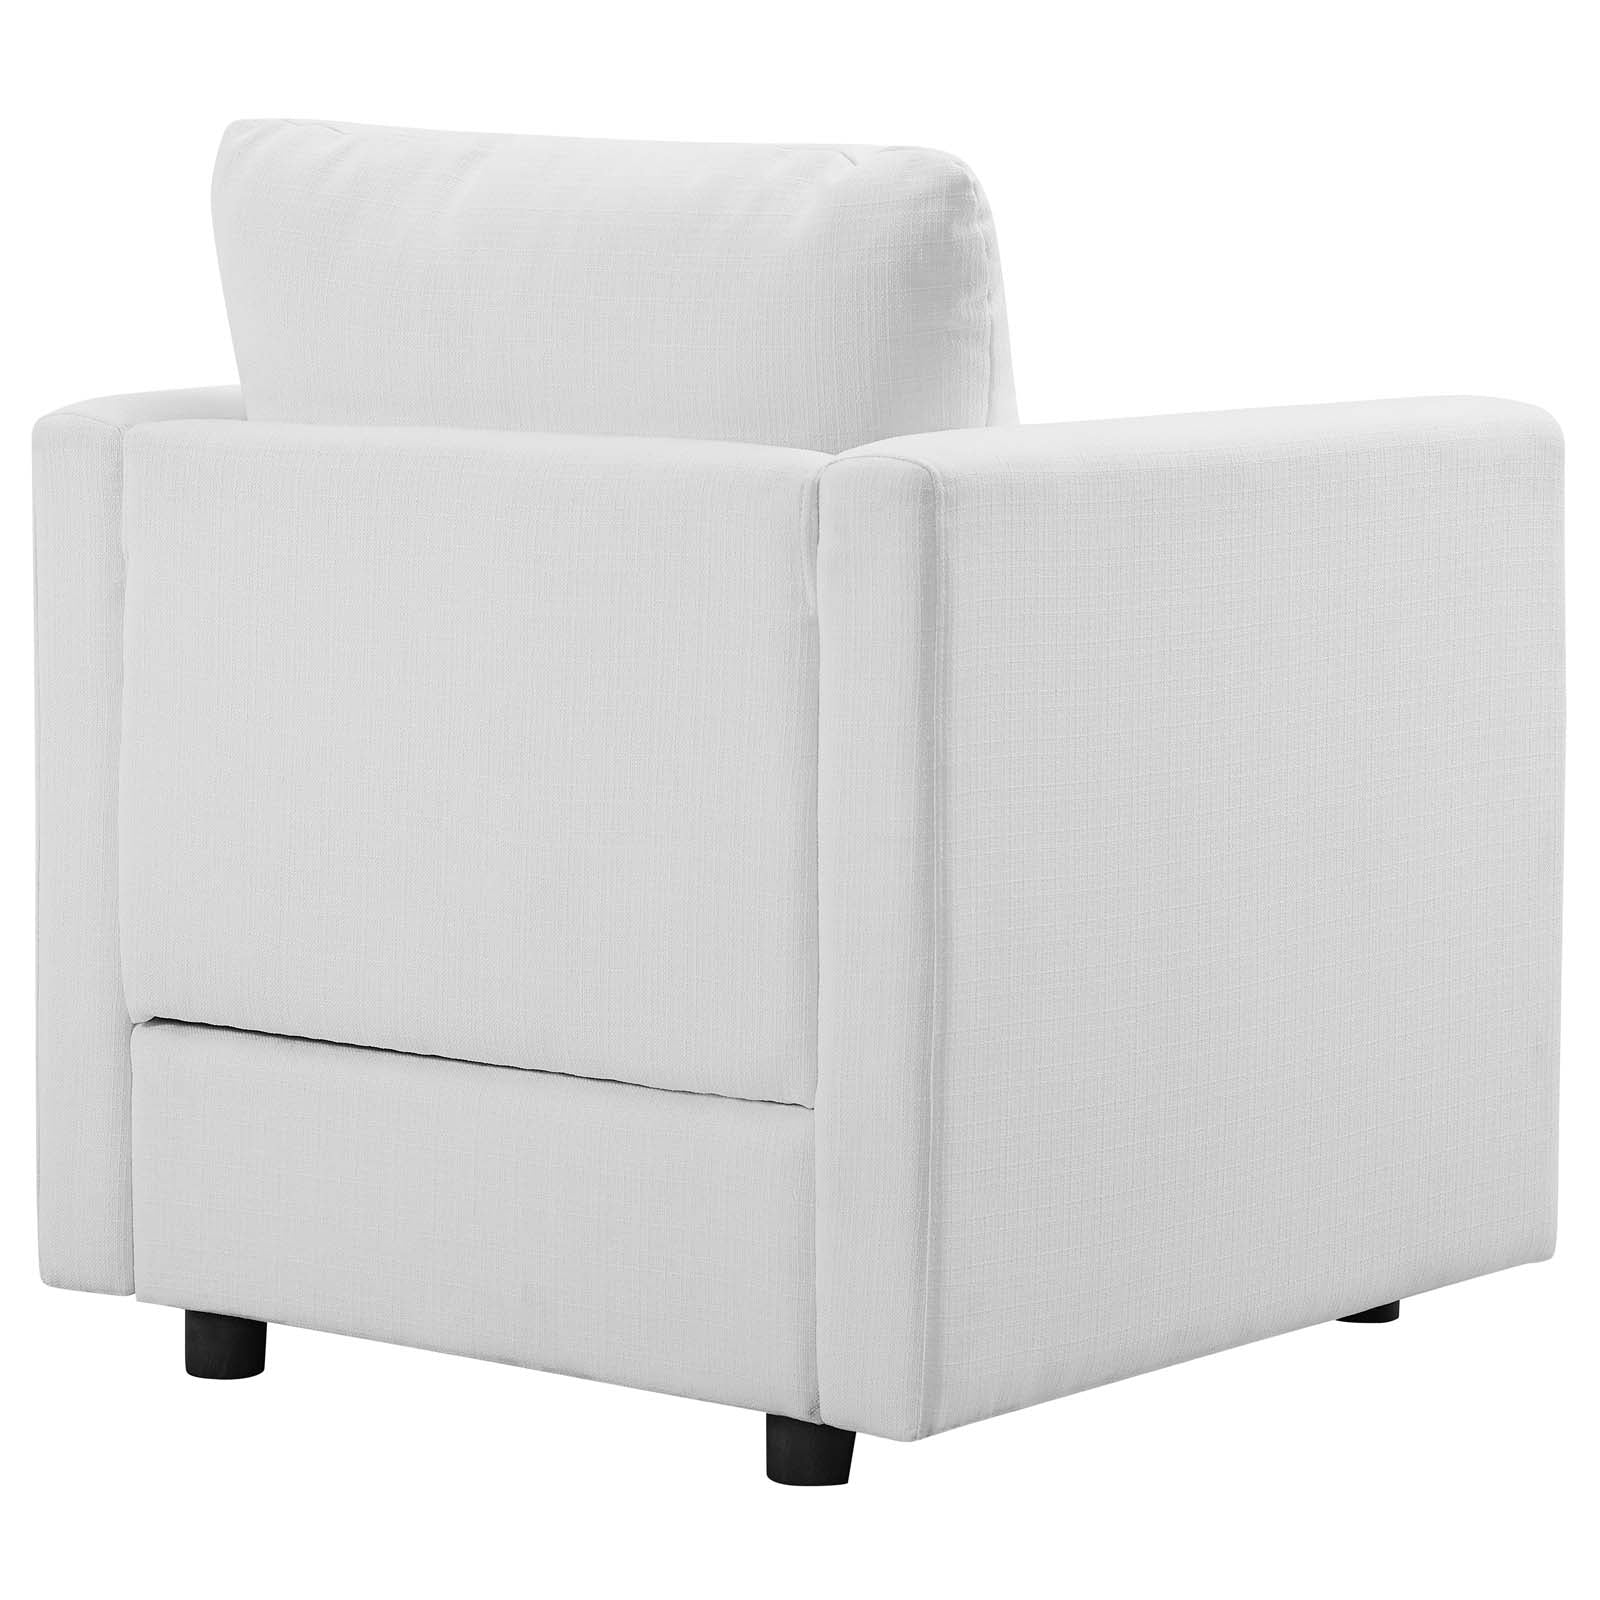 Modway Living Room Sets - Activate 3 Piece Upholstered Fabric Set White